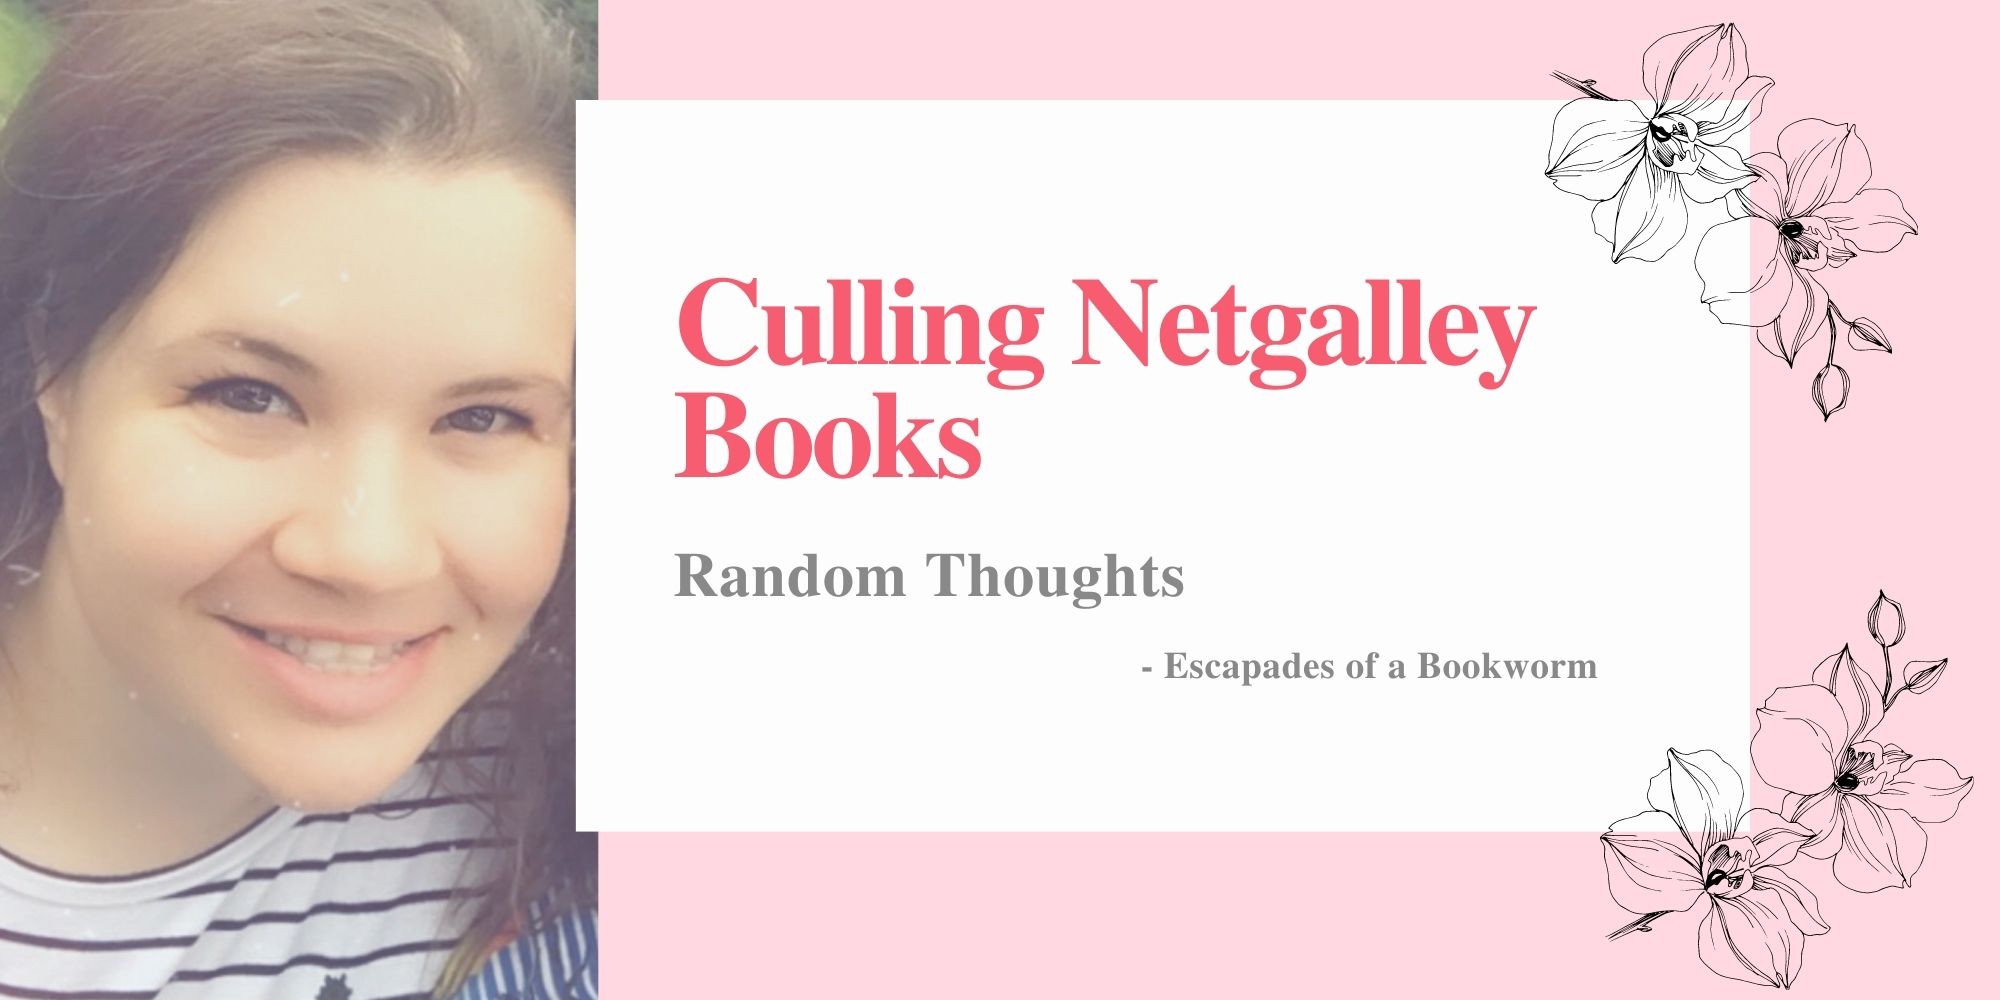 Culling Netgalley Books